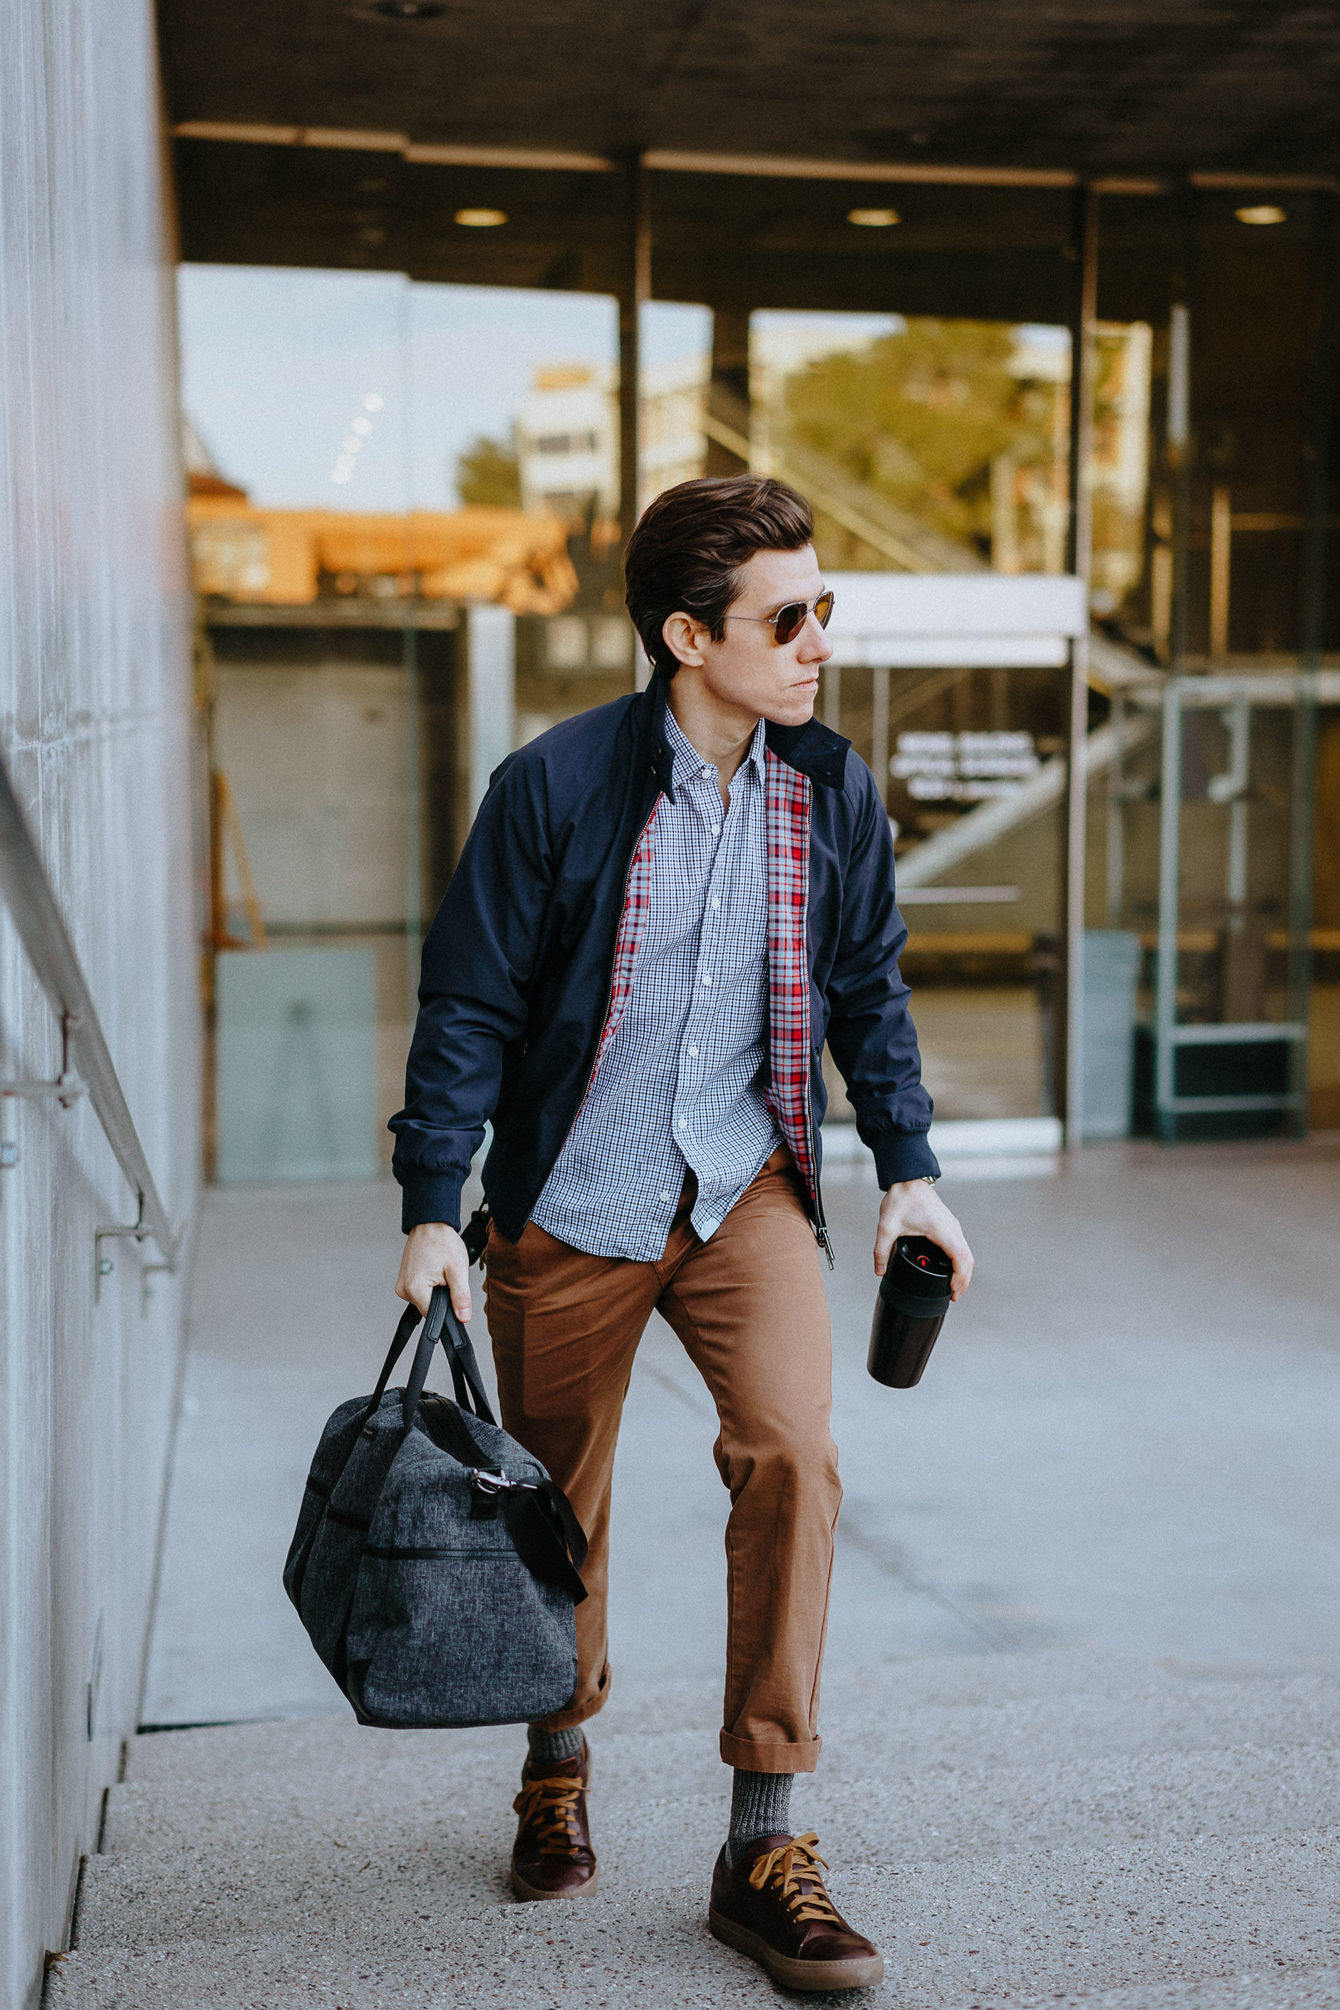 How to Wear Men's Dress Sneakers Correctly - The Modest Man